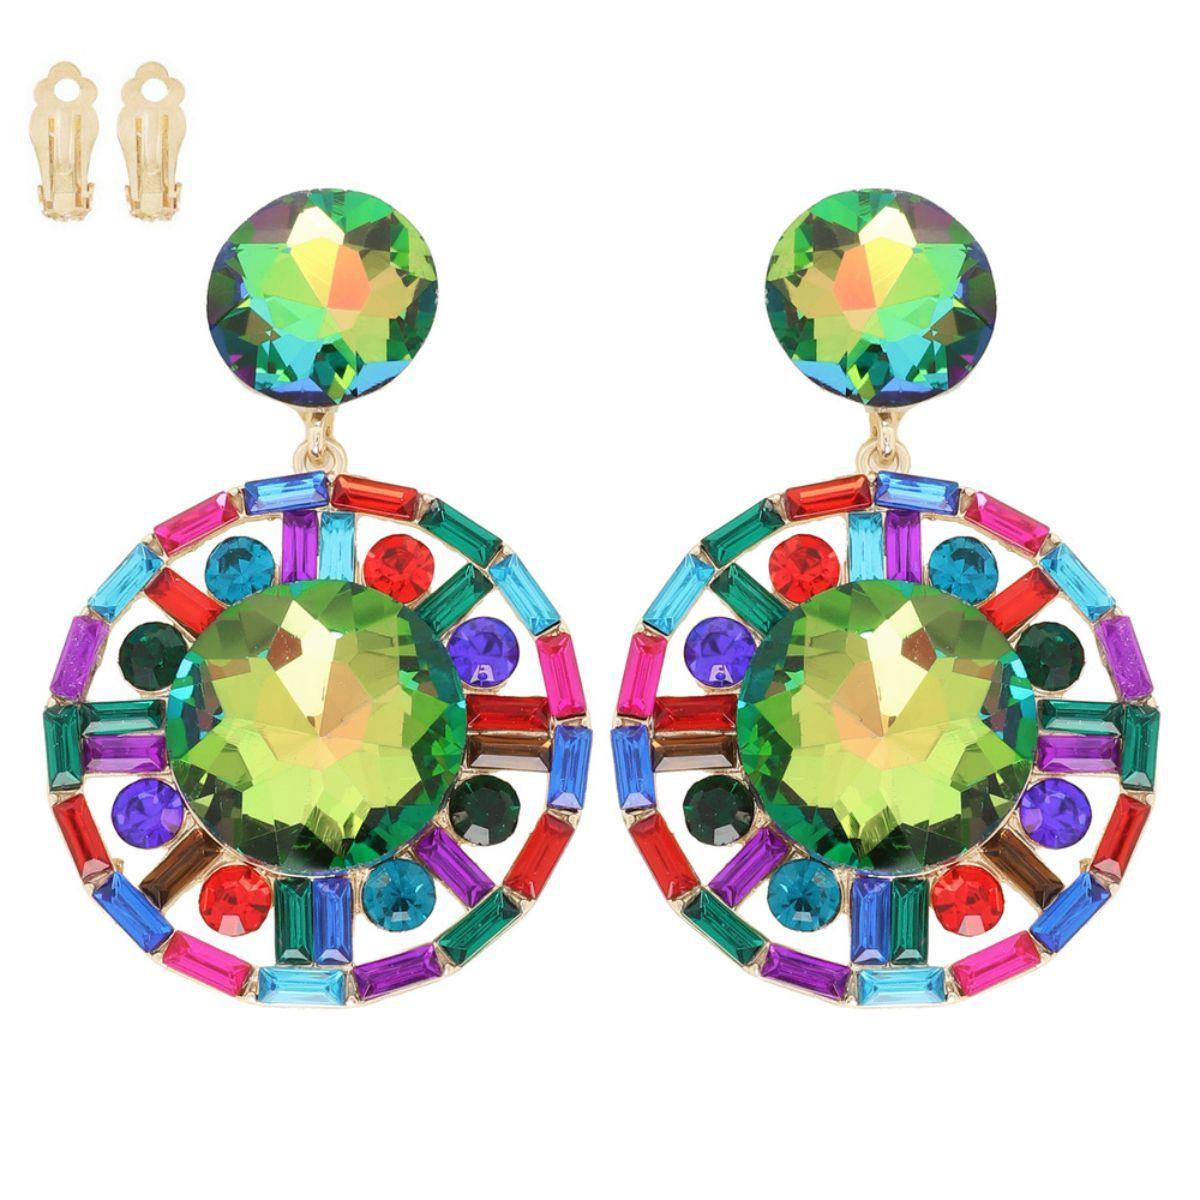 Circle Earrings in Vibrant Hues - A Colorful Statement Piece